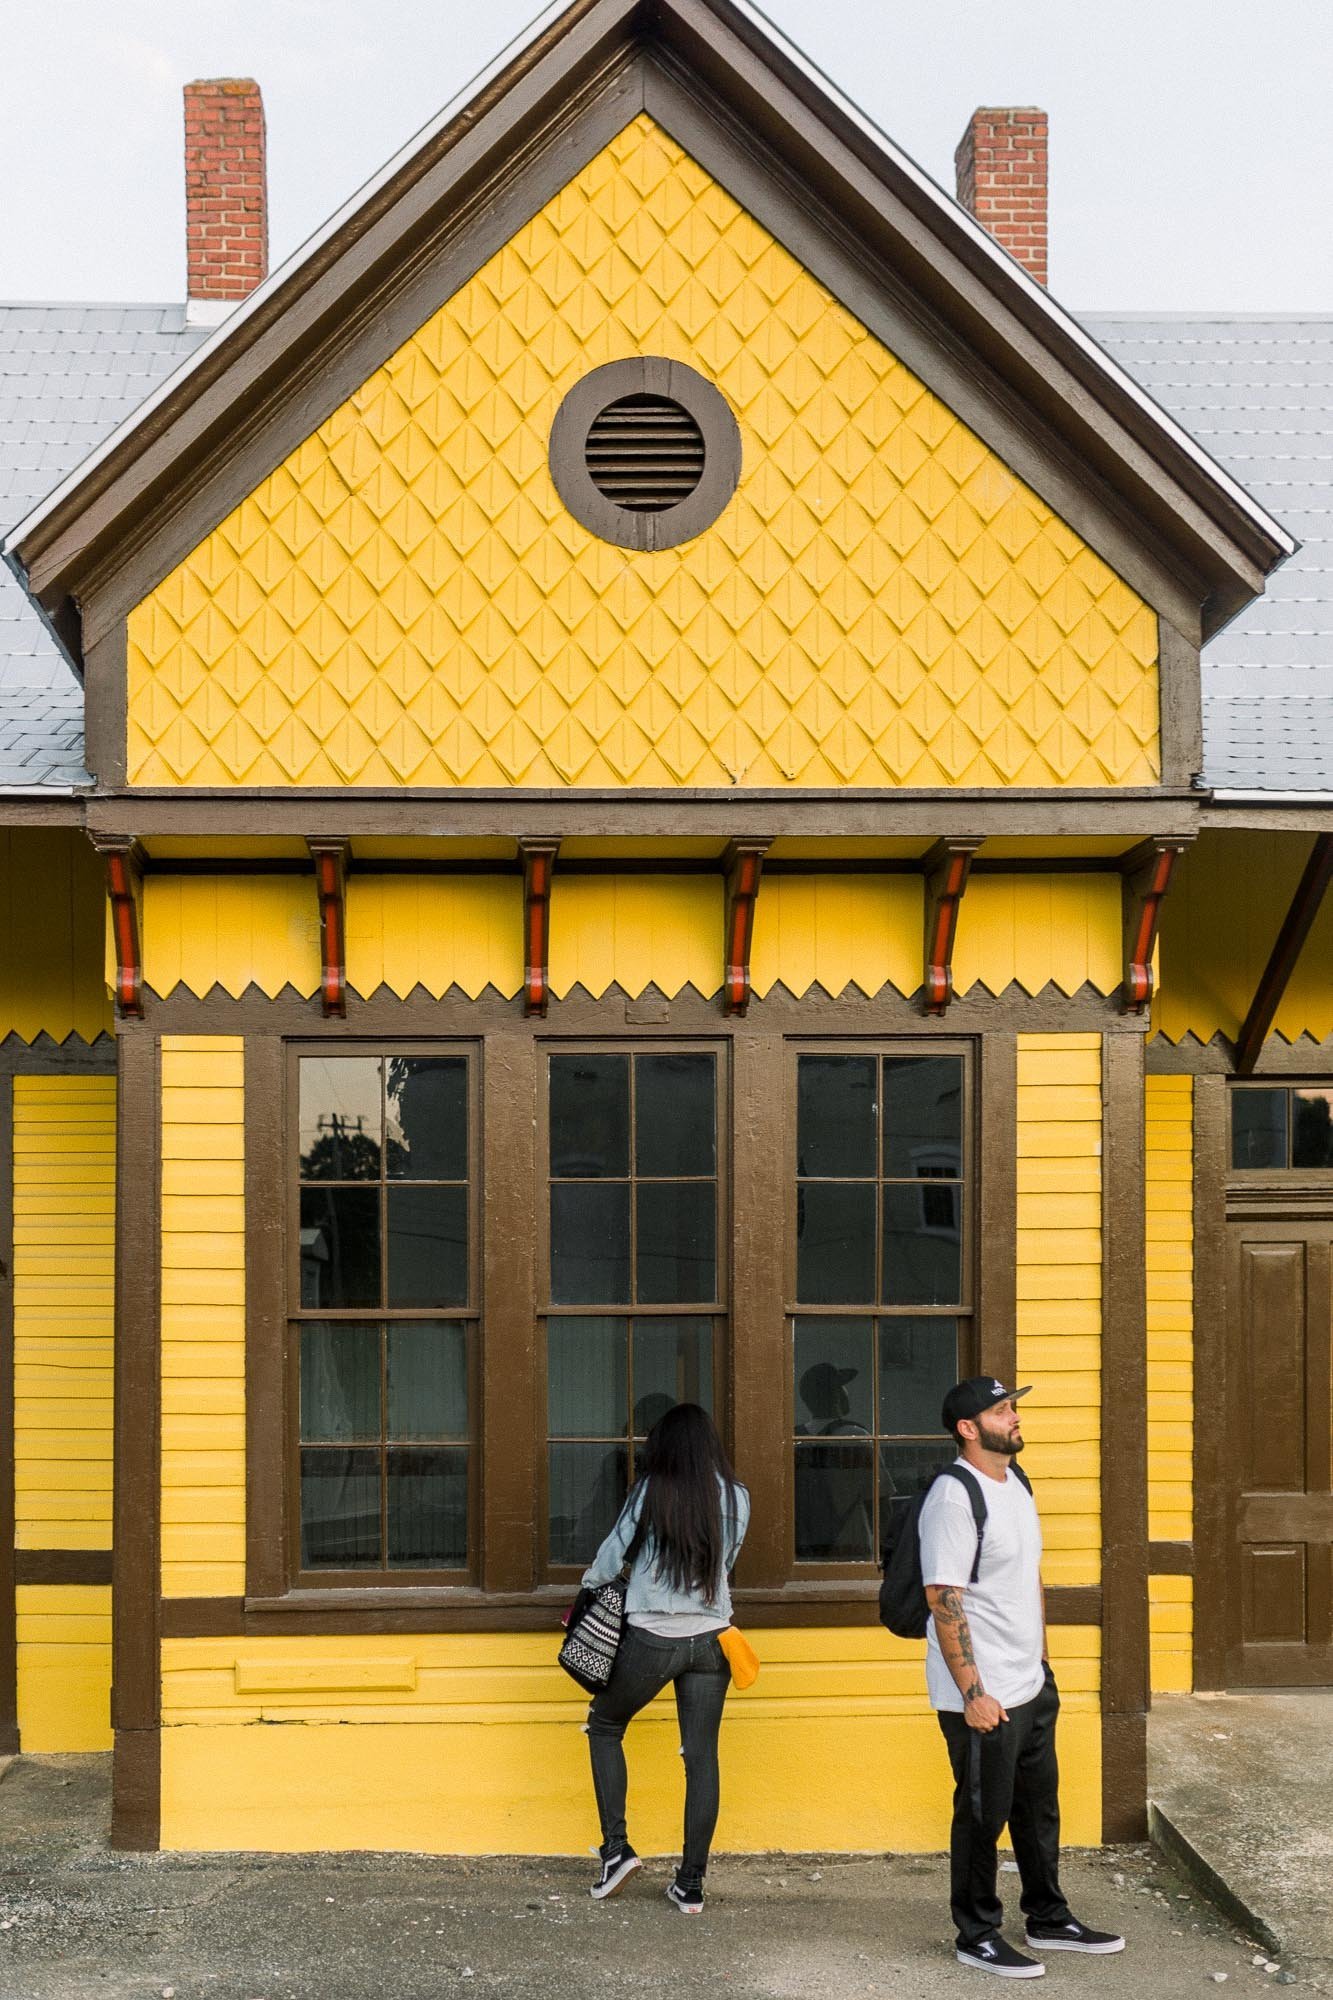 Engagement session in yellow train station captured by Staci Addison Photography